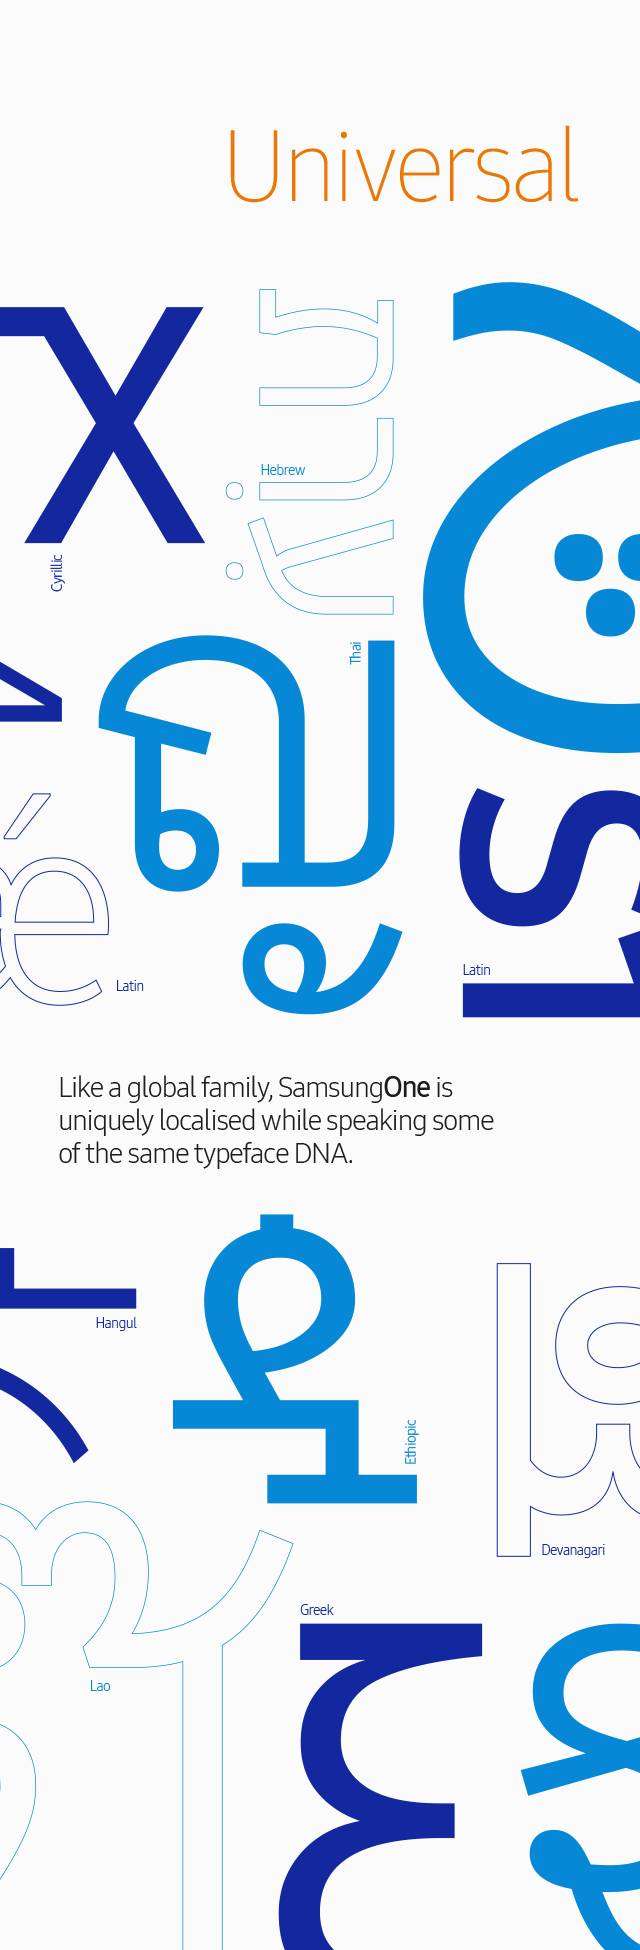 Universal Like a global family, SamsungOne is uniquely localised while speaking some of the same typeface DNA.